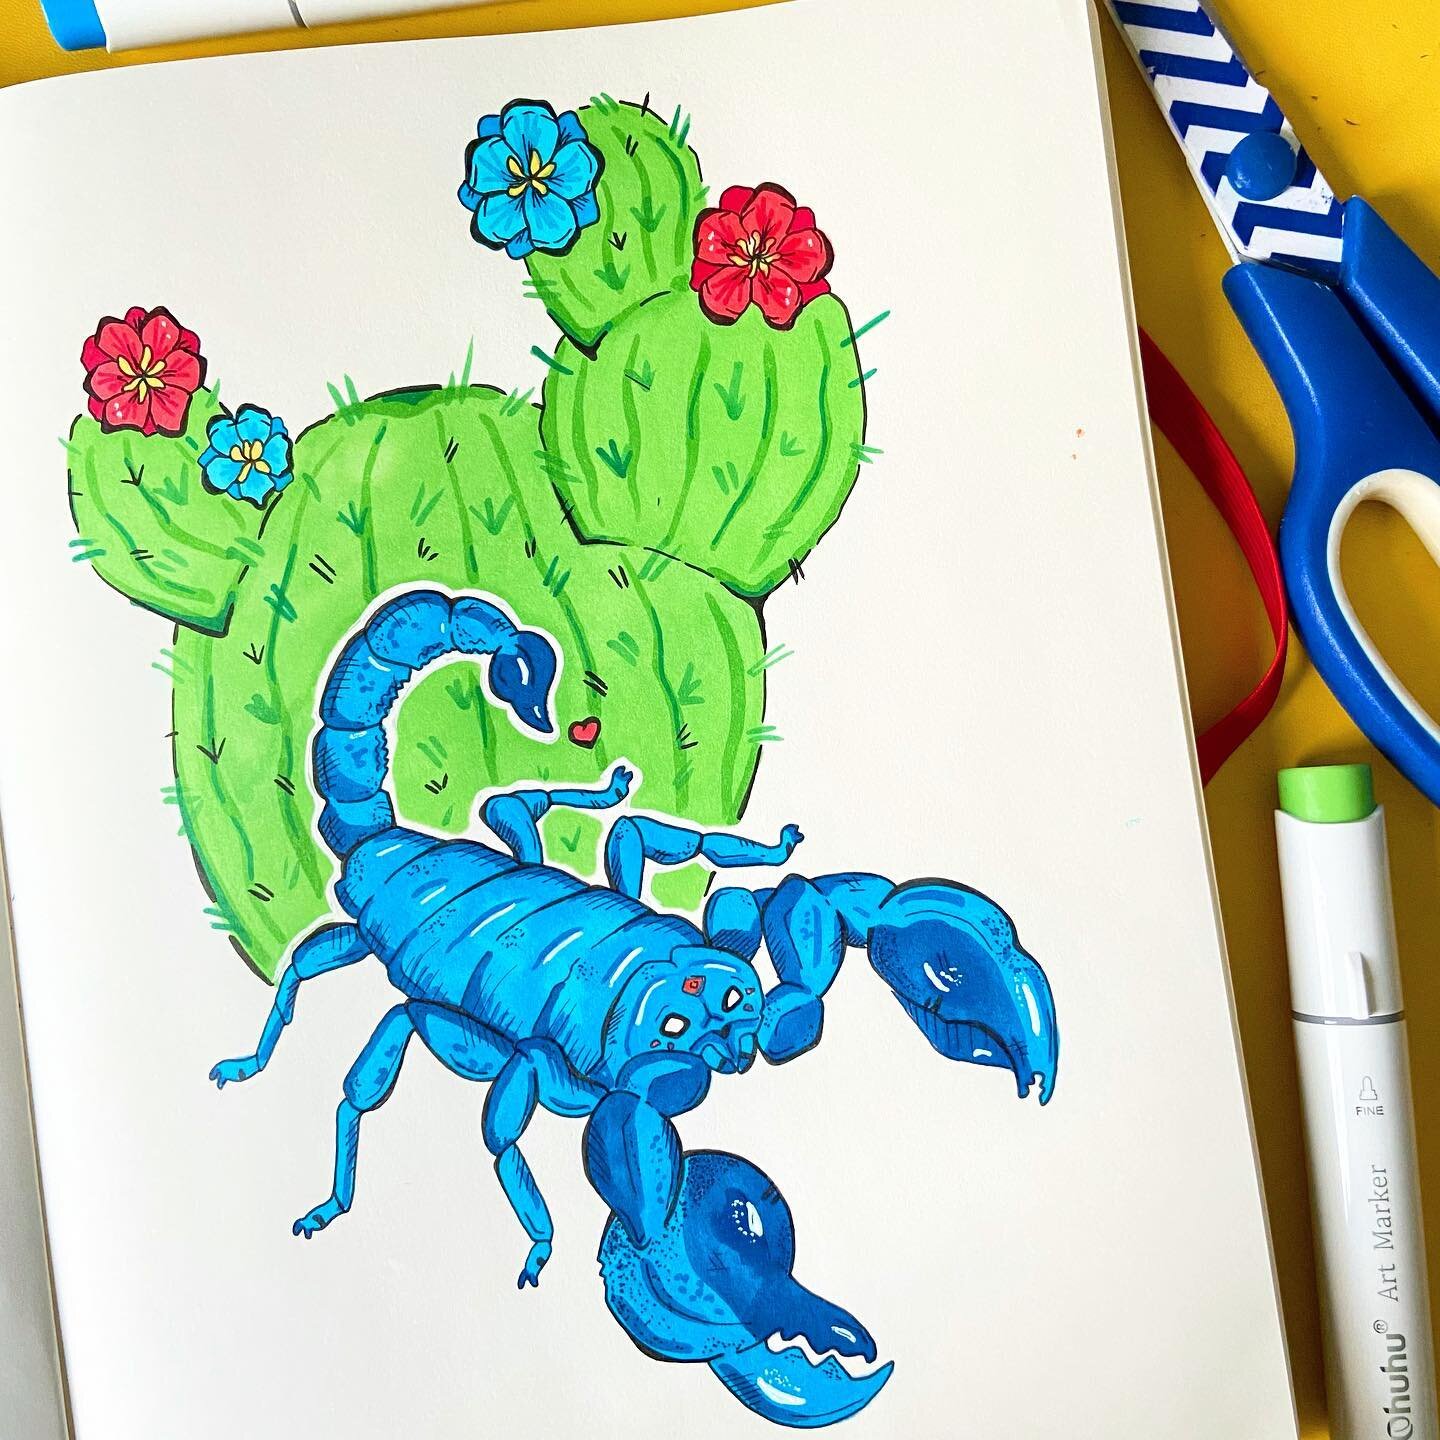 Not everyone&rsquo;s cup of tea, as scorpions aren&rsquo;t too cute but I had an urge to draw one! 🦂🌵 I think they&rsquo;re pretty cool animals.

Also makes a nice entry for #wherewildthingslive2022 for &ldquo;Desert Dunes.&rdquo; 🏜